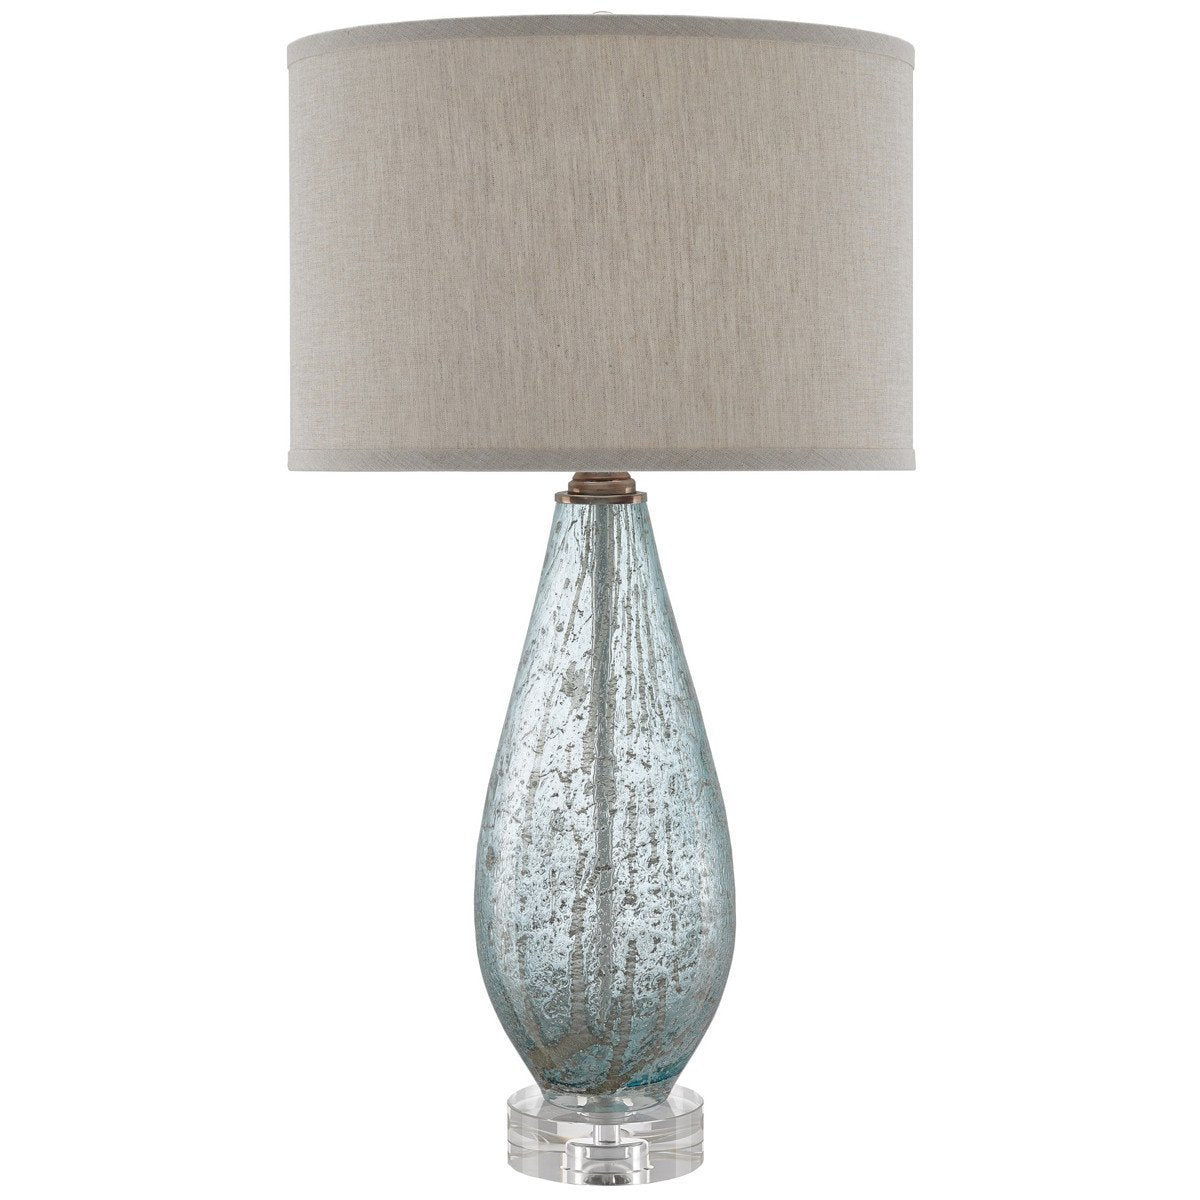 Currey and Company Optimist Table Lamp